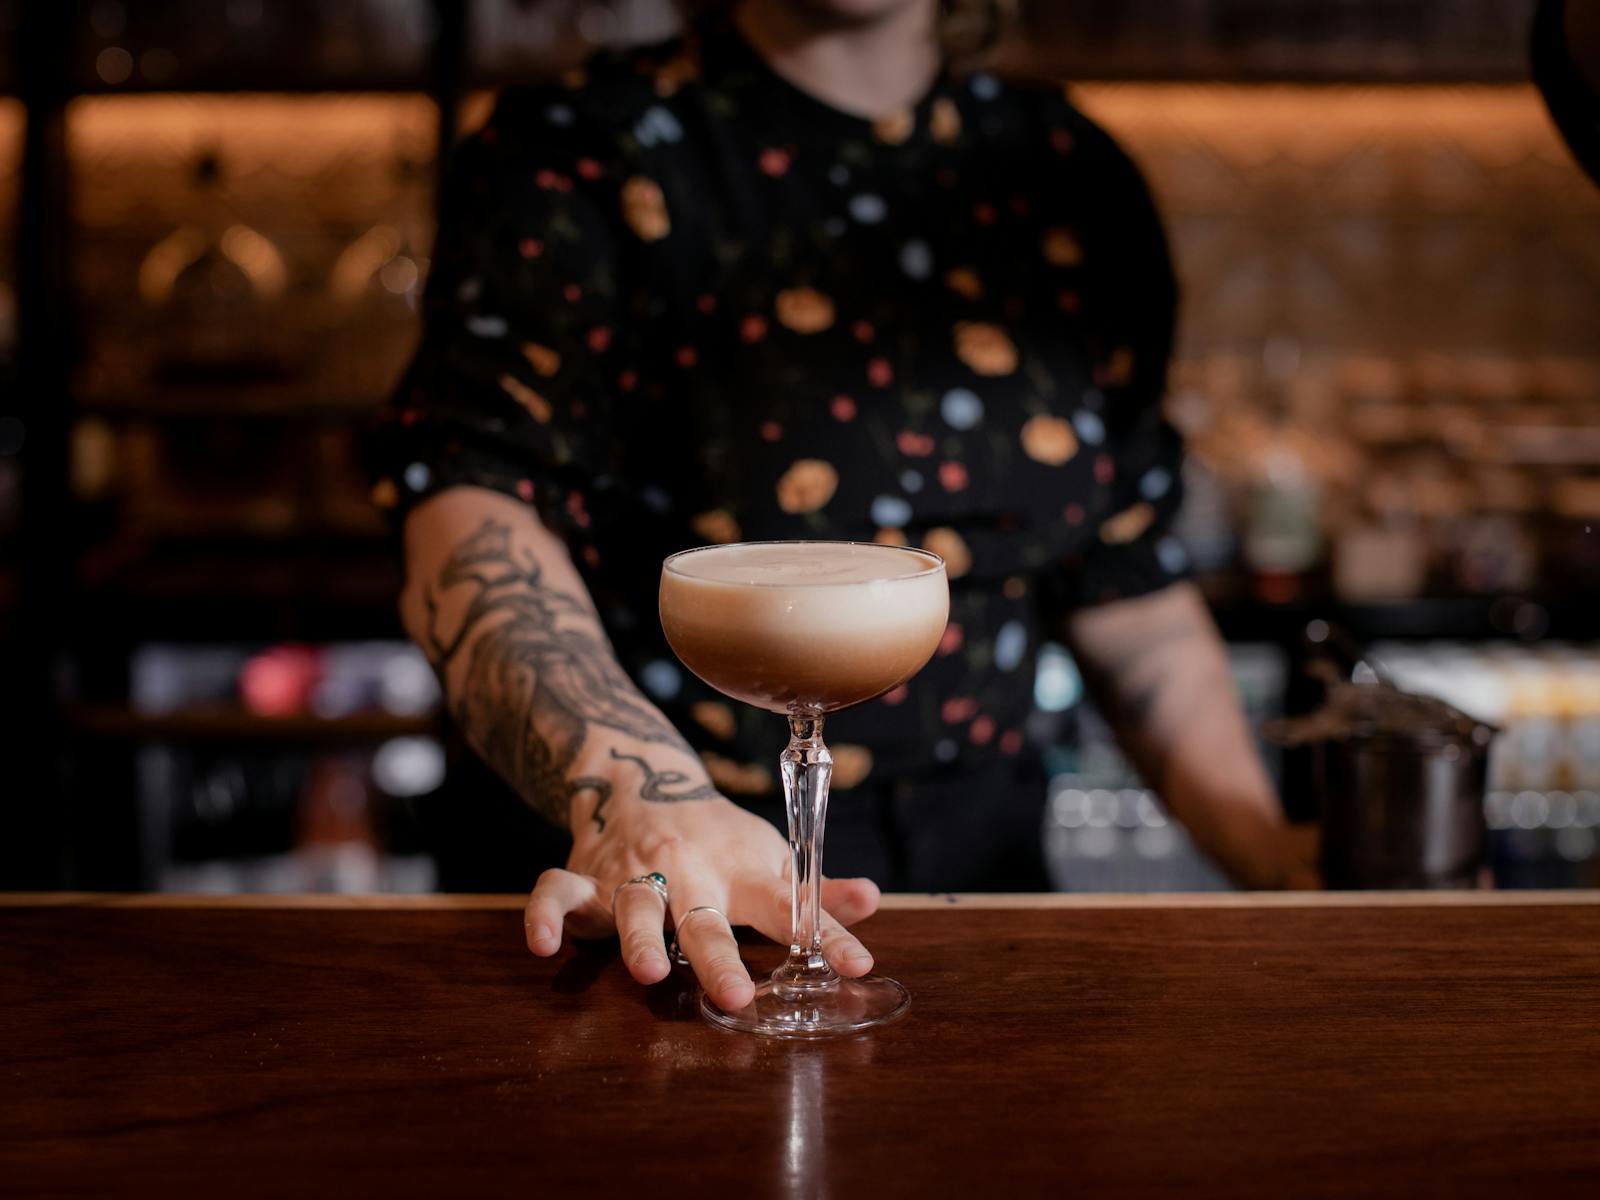 Espresso martini being held on bar by bartender with an octopus tattoo on their arm